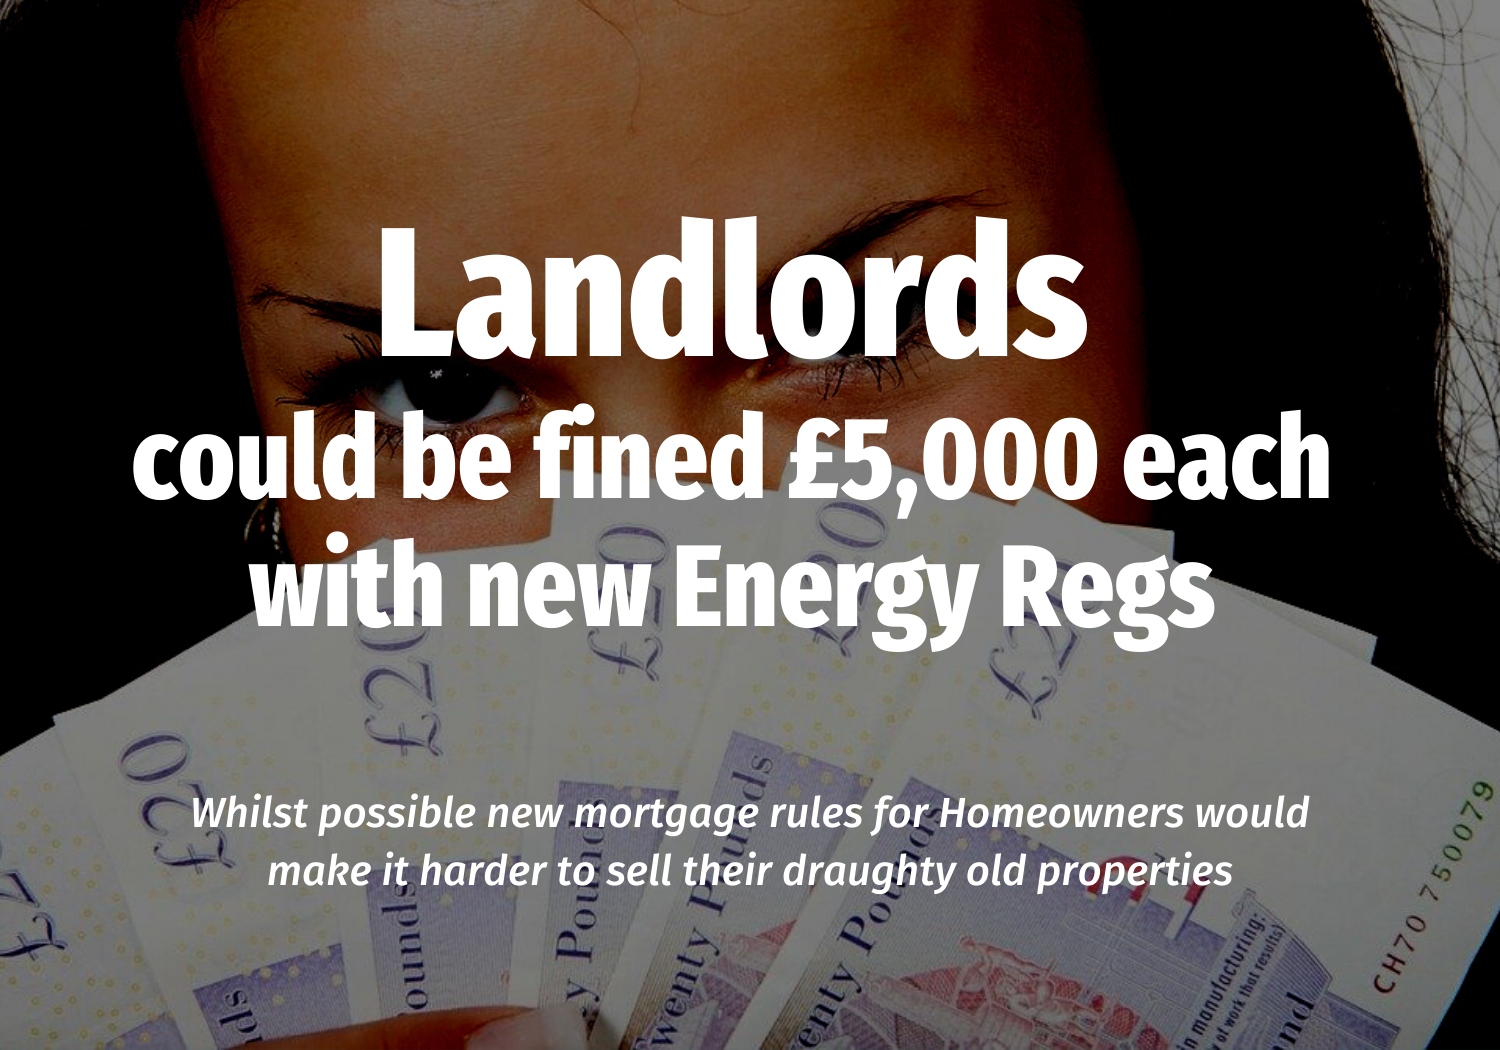 32.7% Of Harrow Landlords Could Be Fined £5,000 Each With New Energy Regs